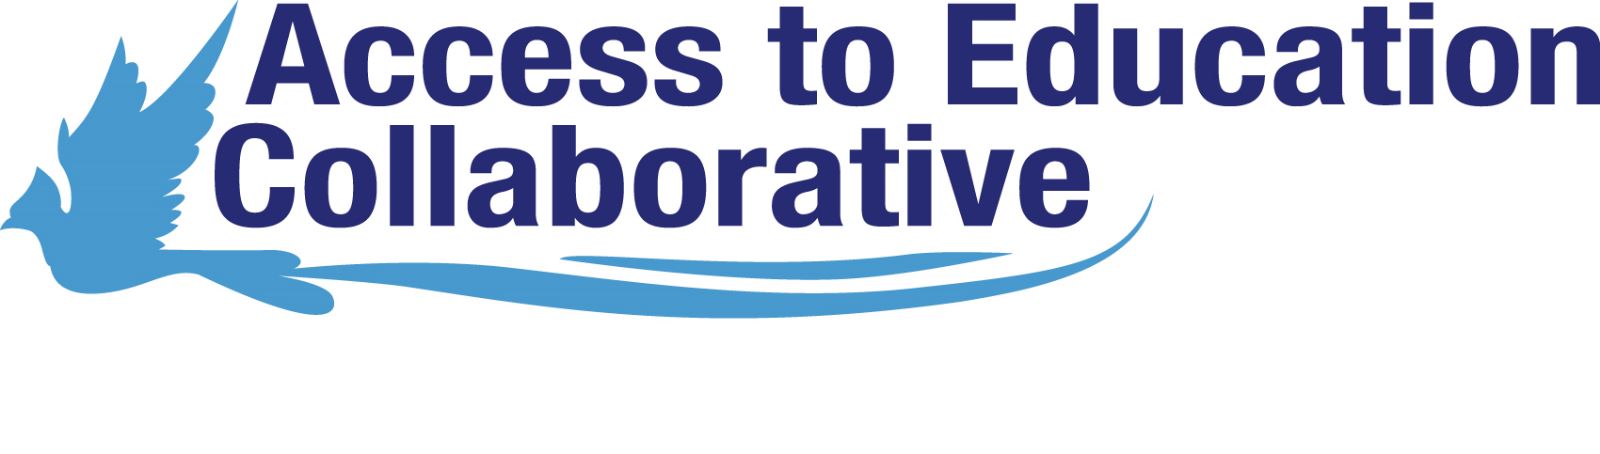 Access to education collaborative